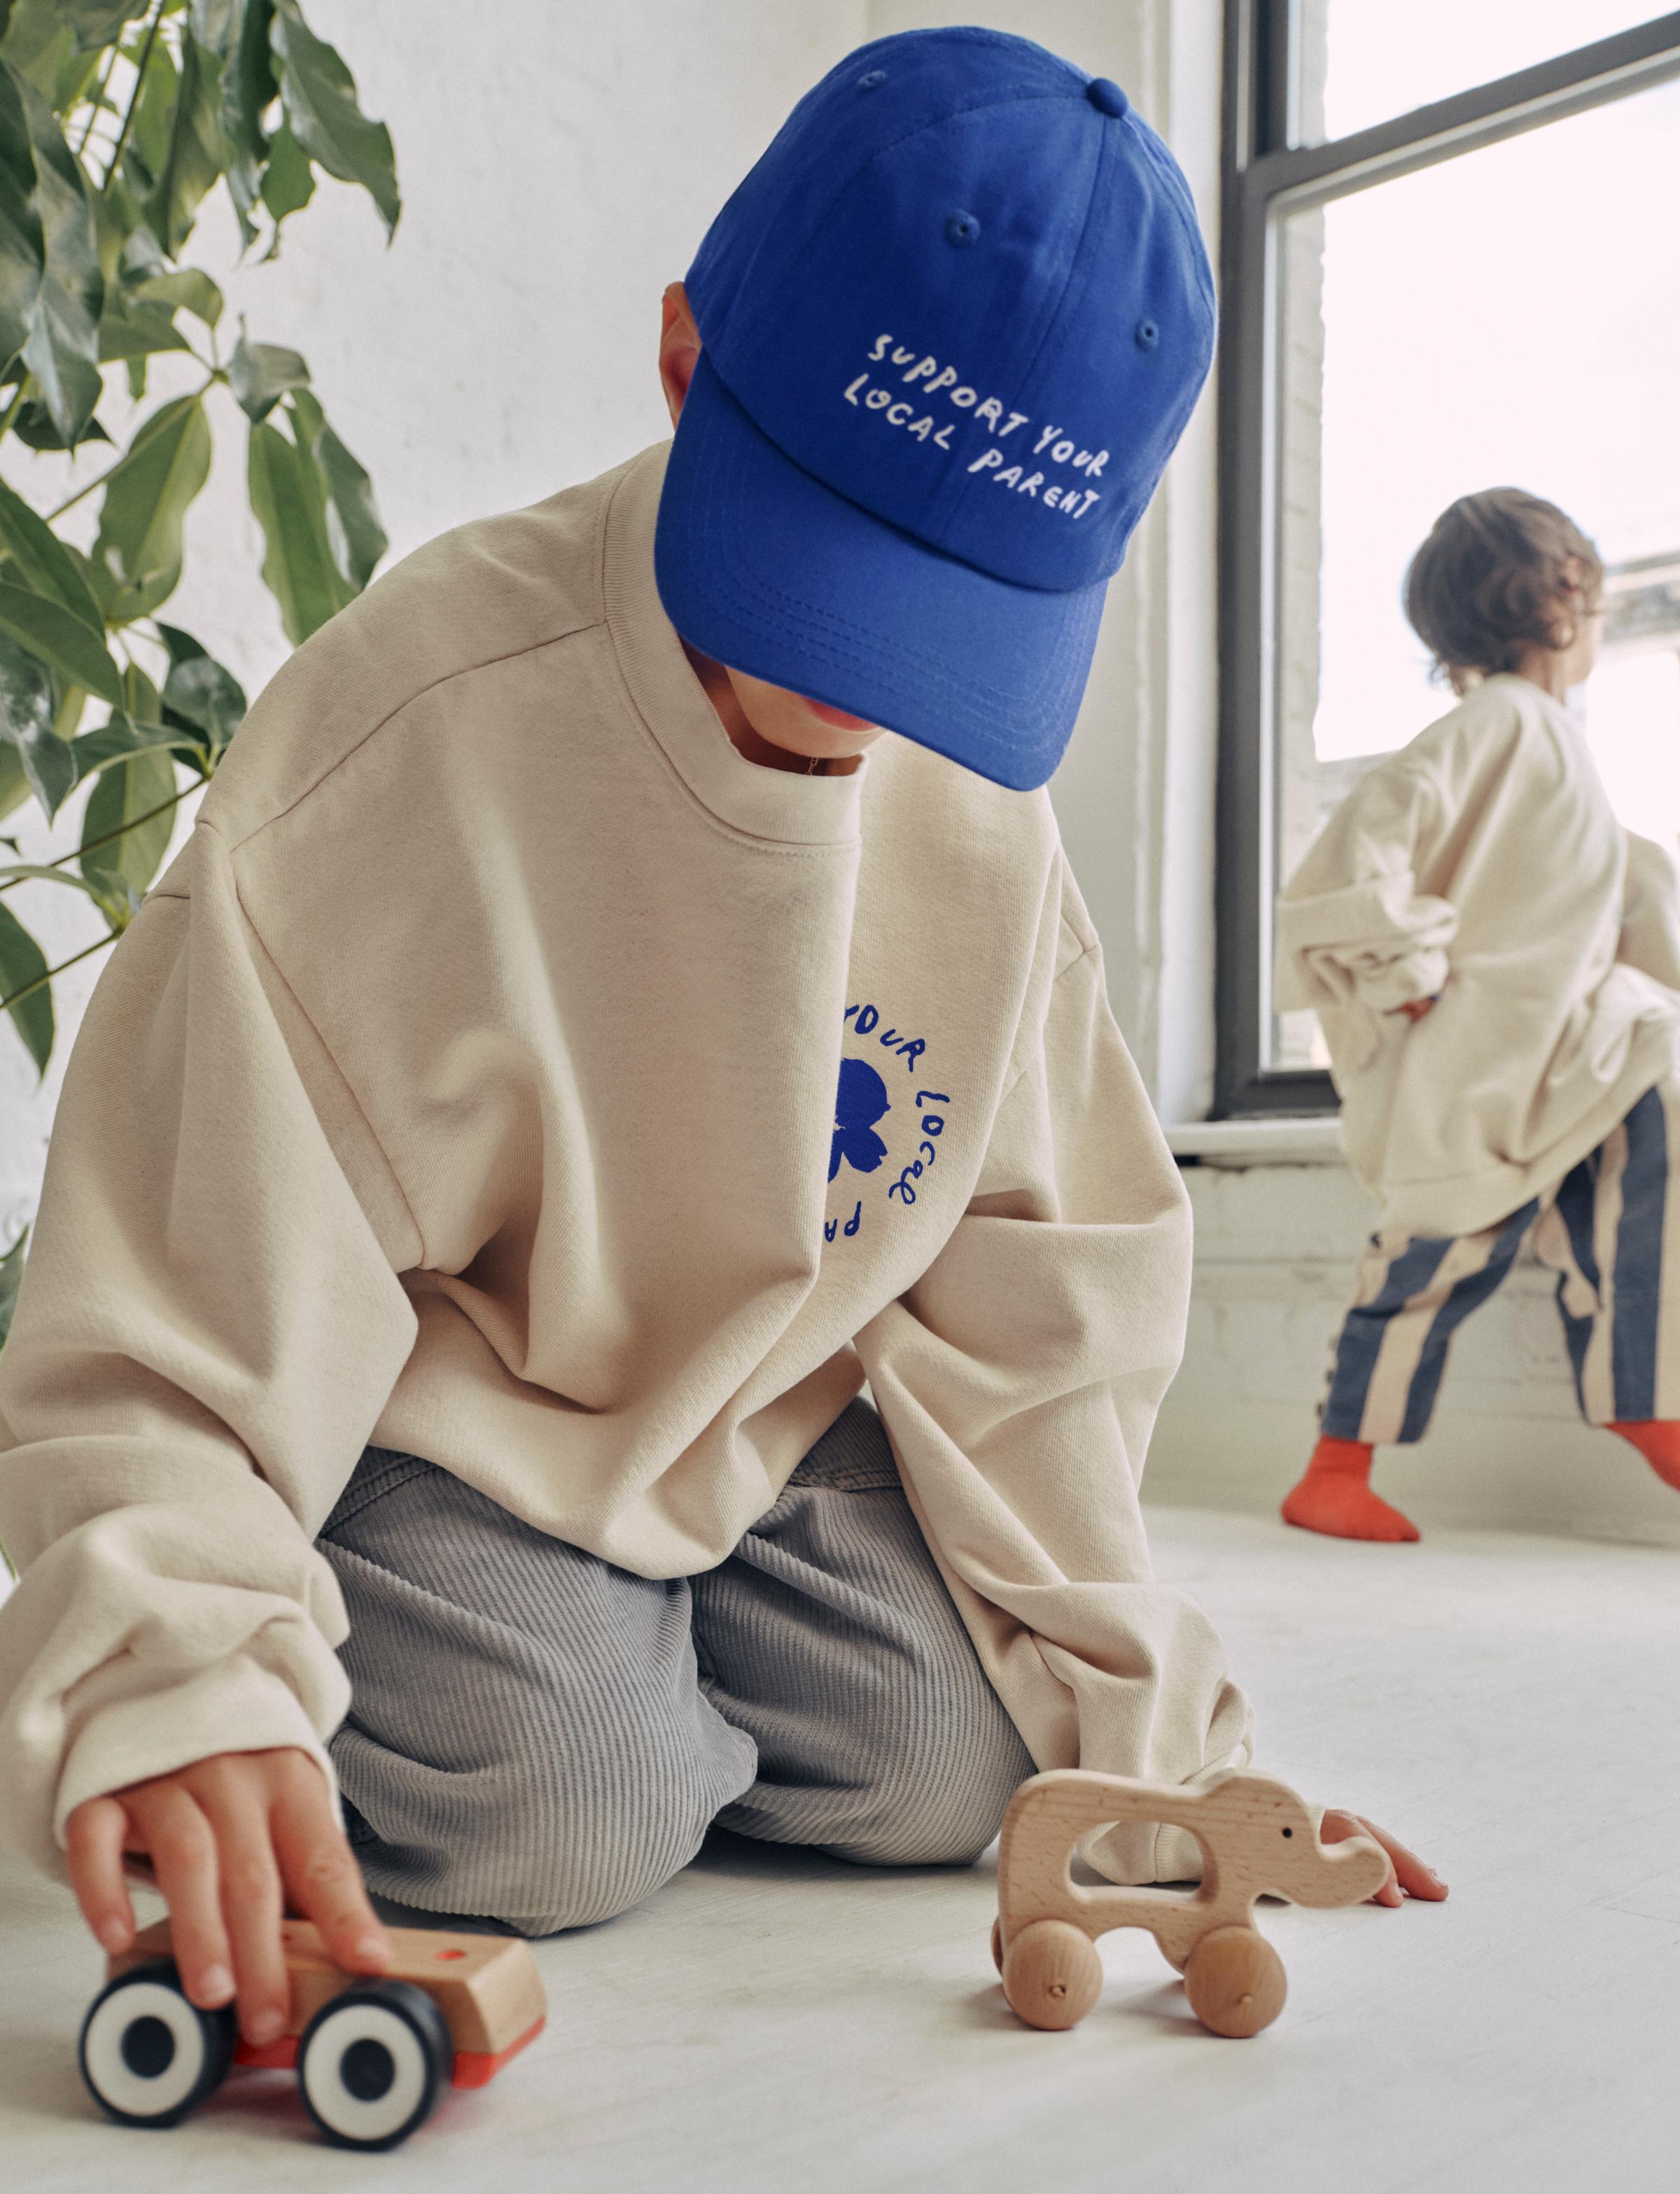 A little boy sits on the floor playing with wooden figurines in an electric blue SYLP hat.